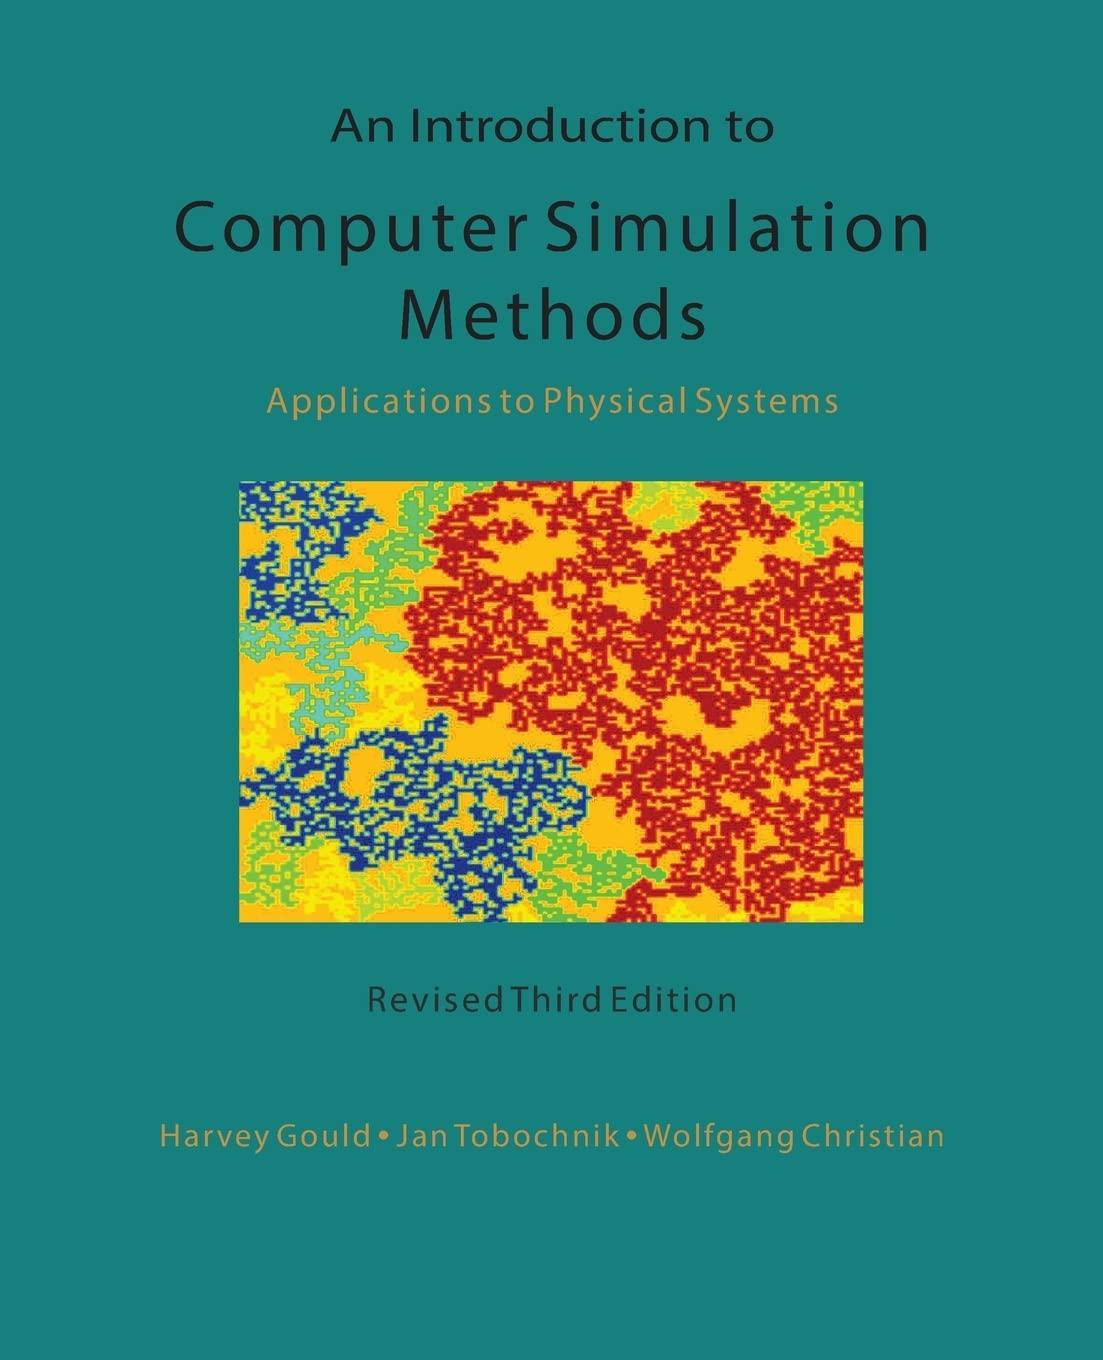 an introduction to computer simulation methods applications to physical systems 3rd edition harvey gould, jan